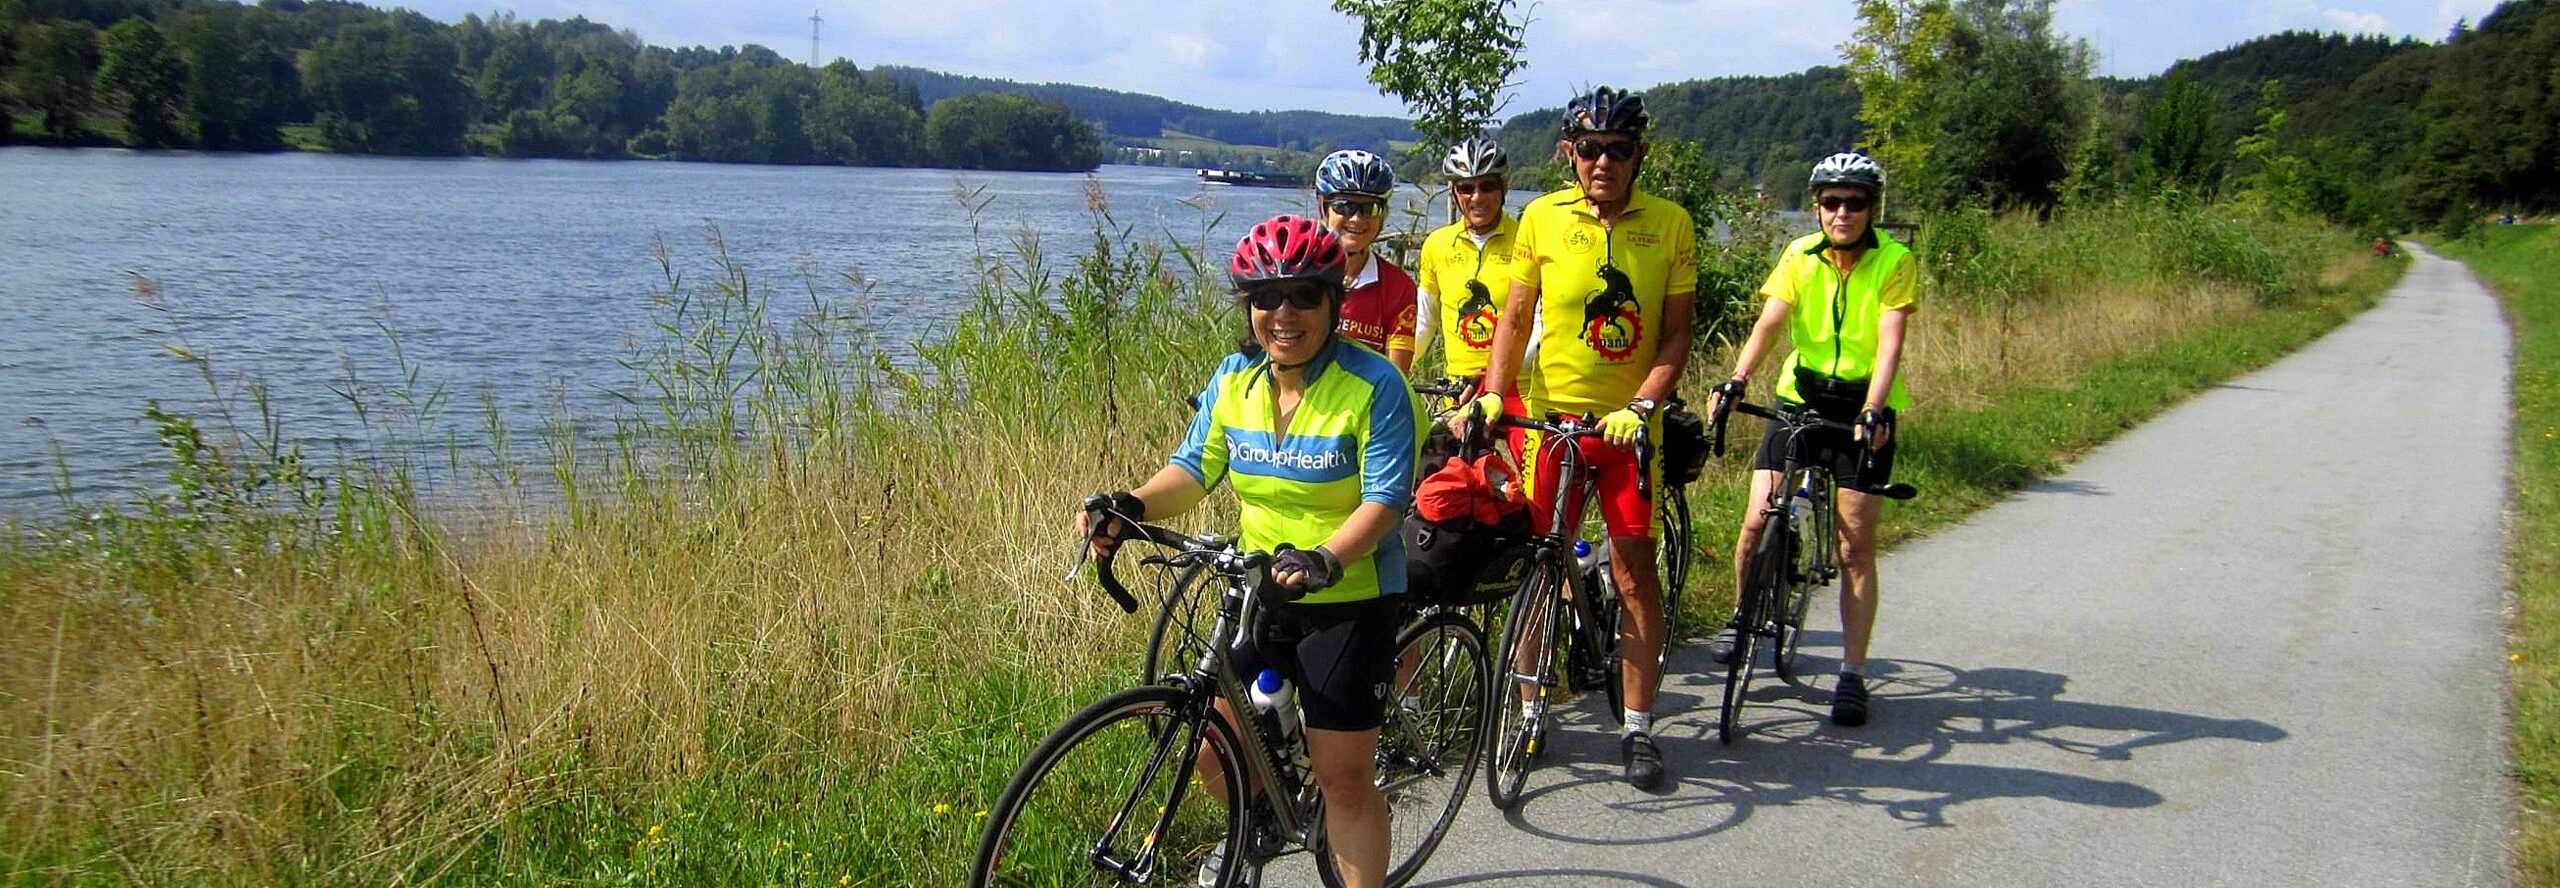 Bicycling the Danube with ExperiencePlus!